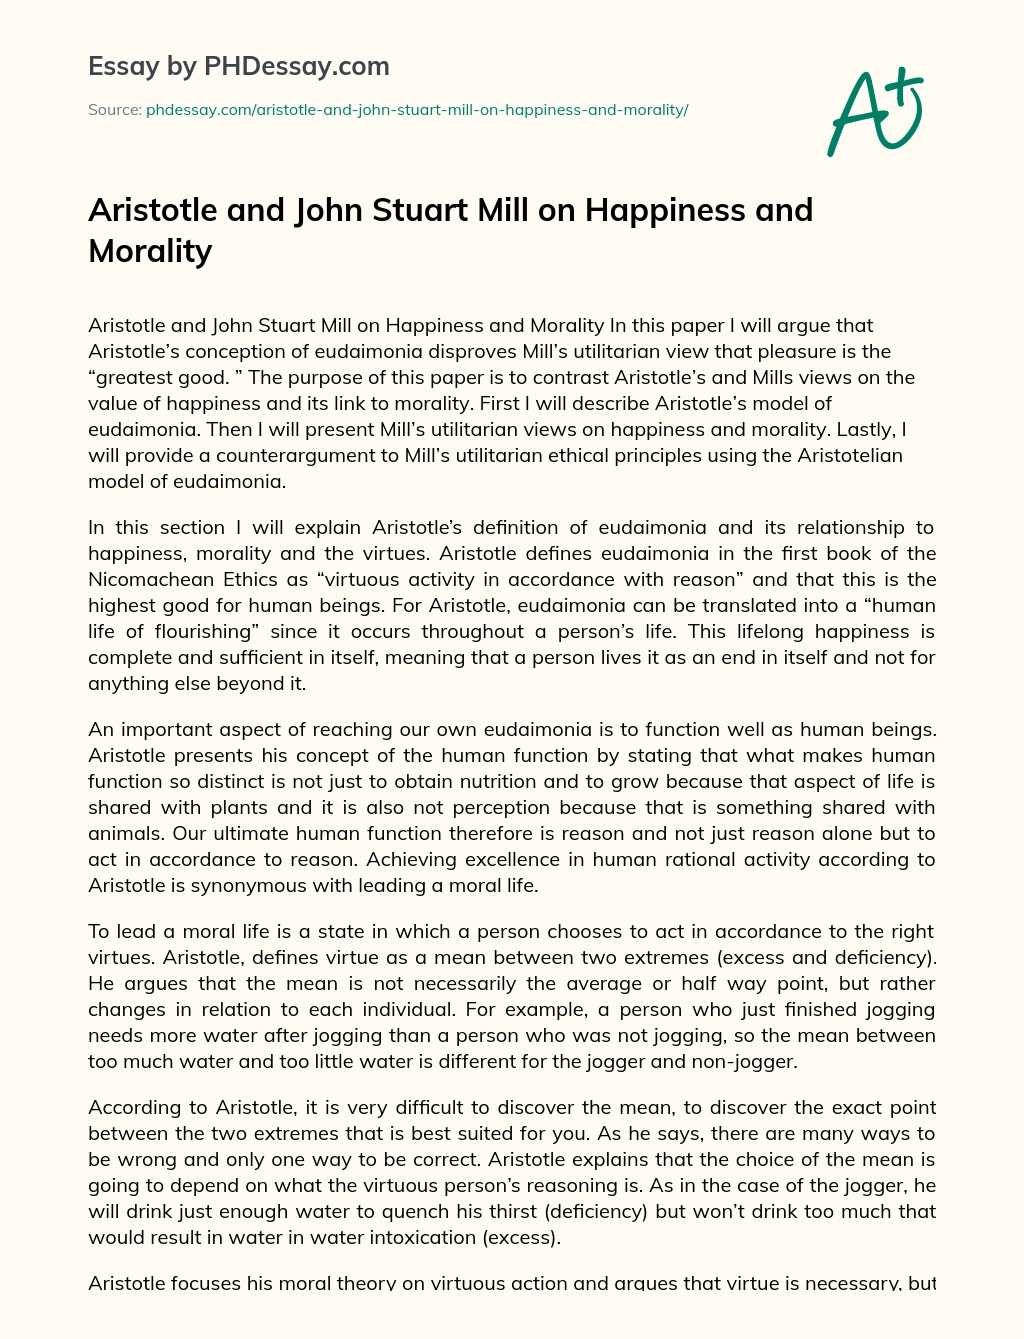 Aristotle and John Stuart Mill on Happiness and Morality essay